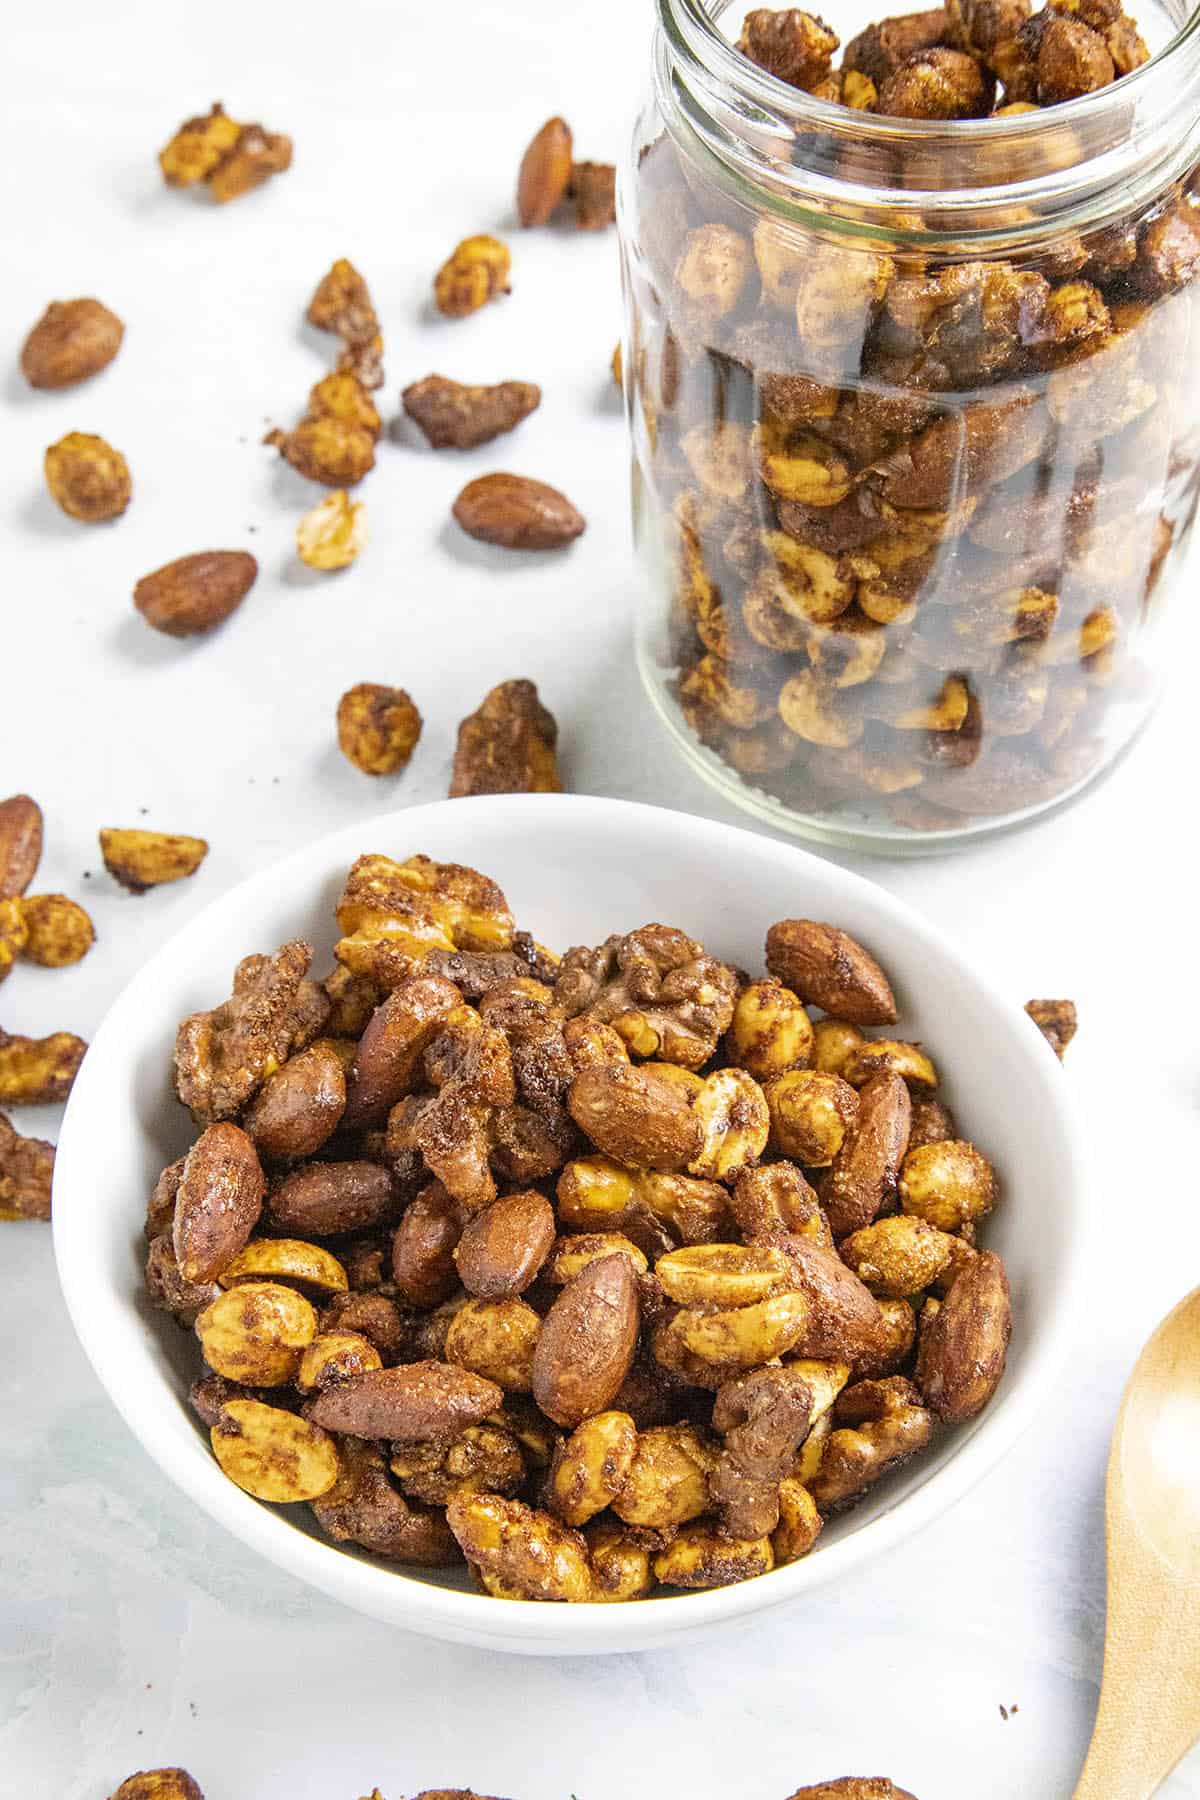 Spiced Nuts Recipe made at home